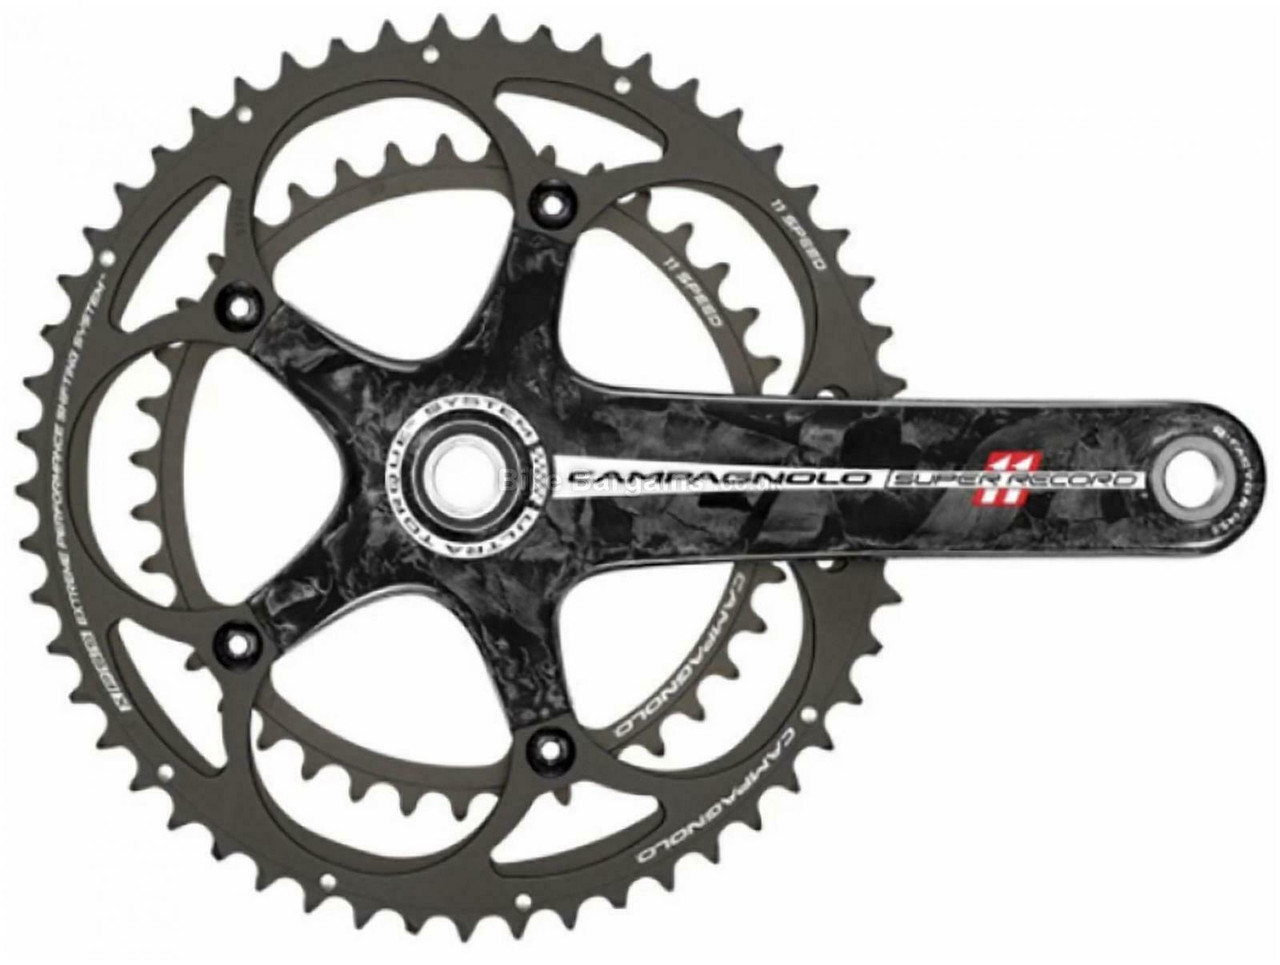 Campagnolo FC11/12-SR  Super Record 2011/14 Ultra Torque 11 Speed Chainset Steel Axle